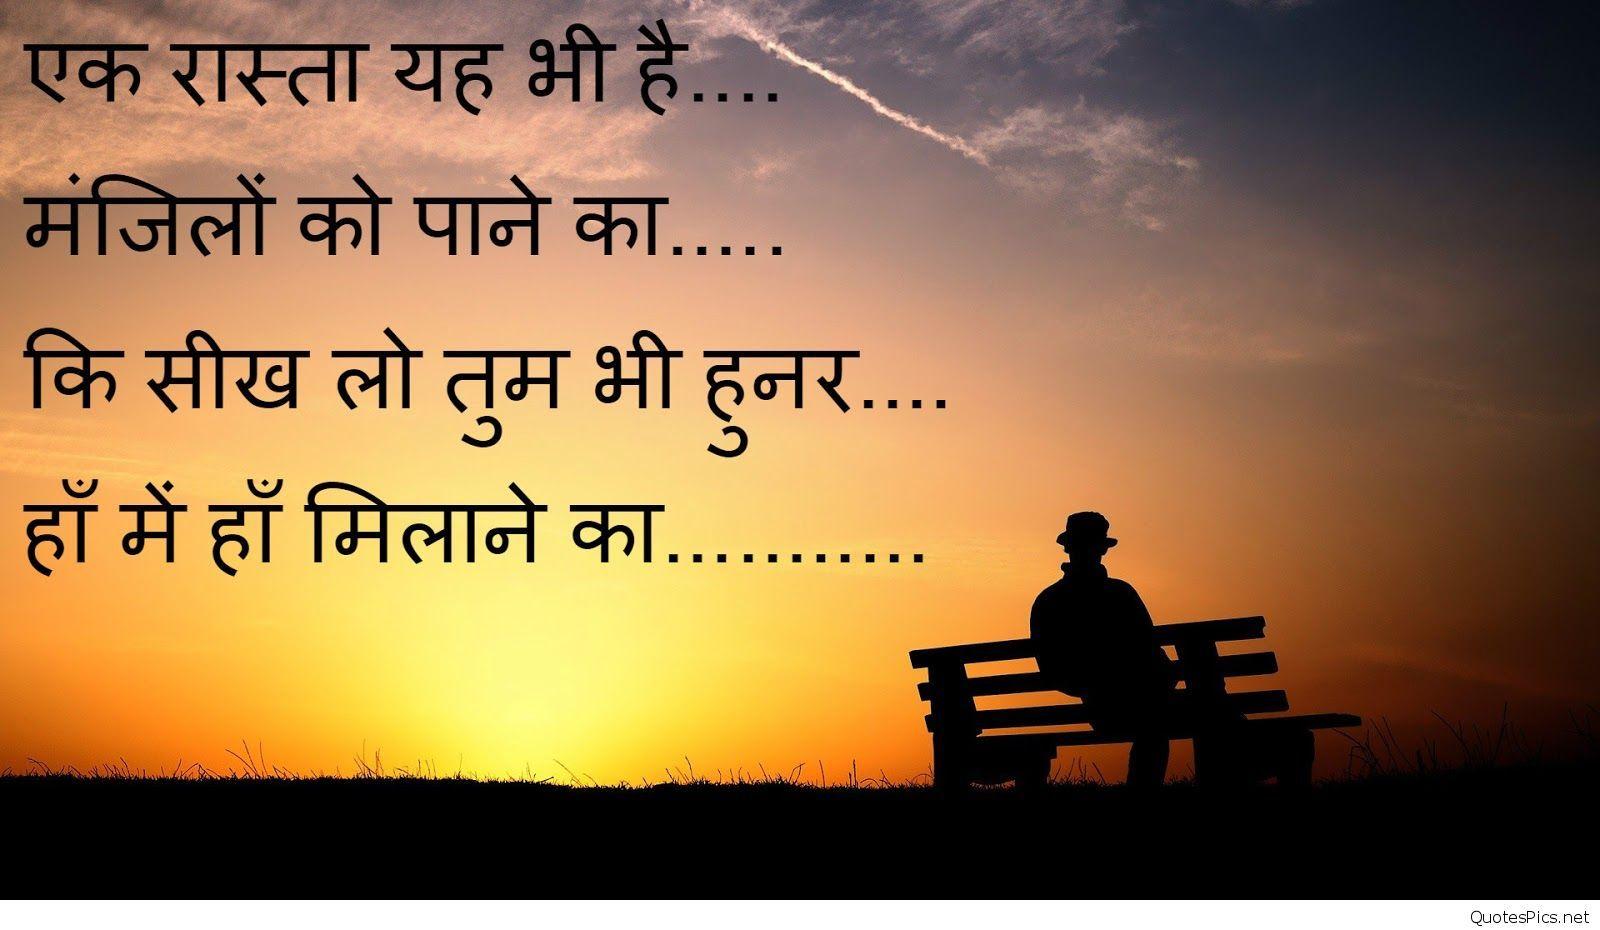 Hindi Dard Sher/wallpapers In HD - Wallpaper Cave